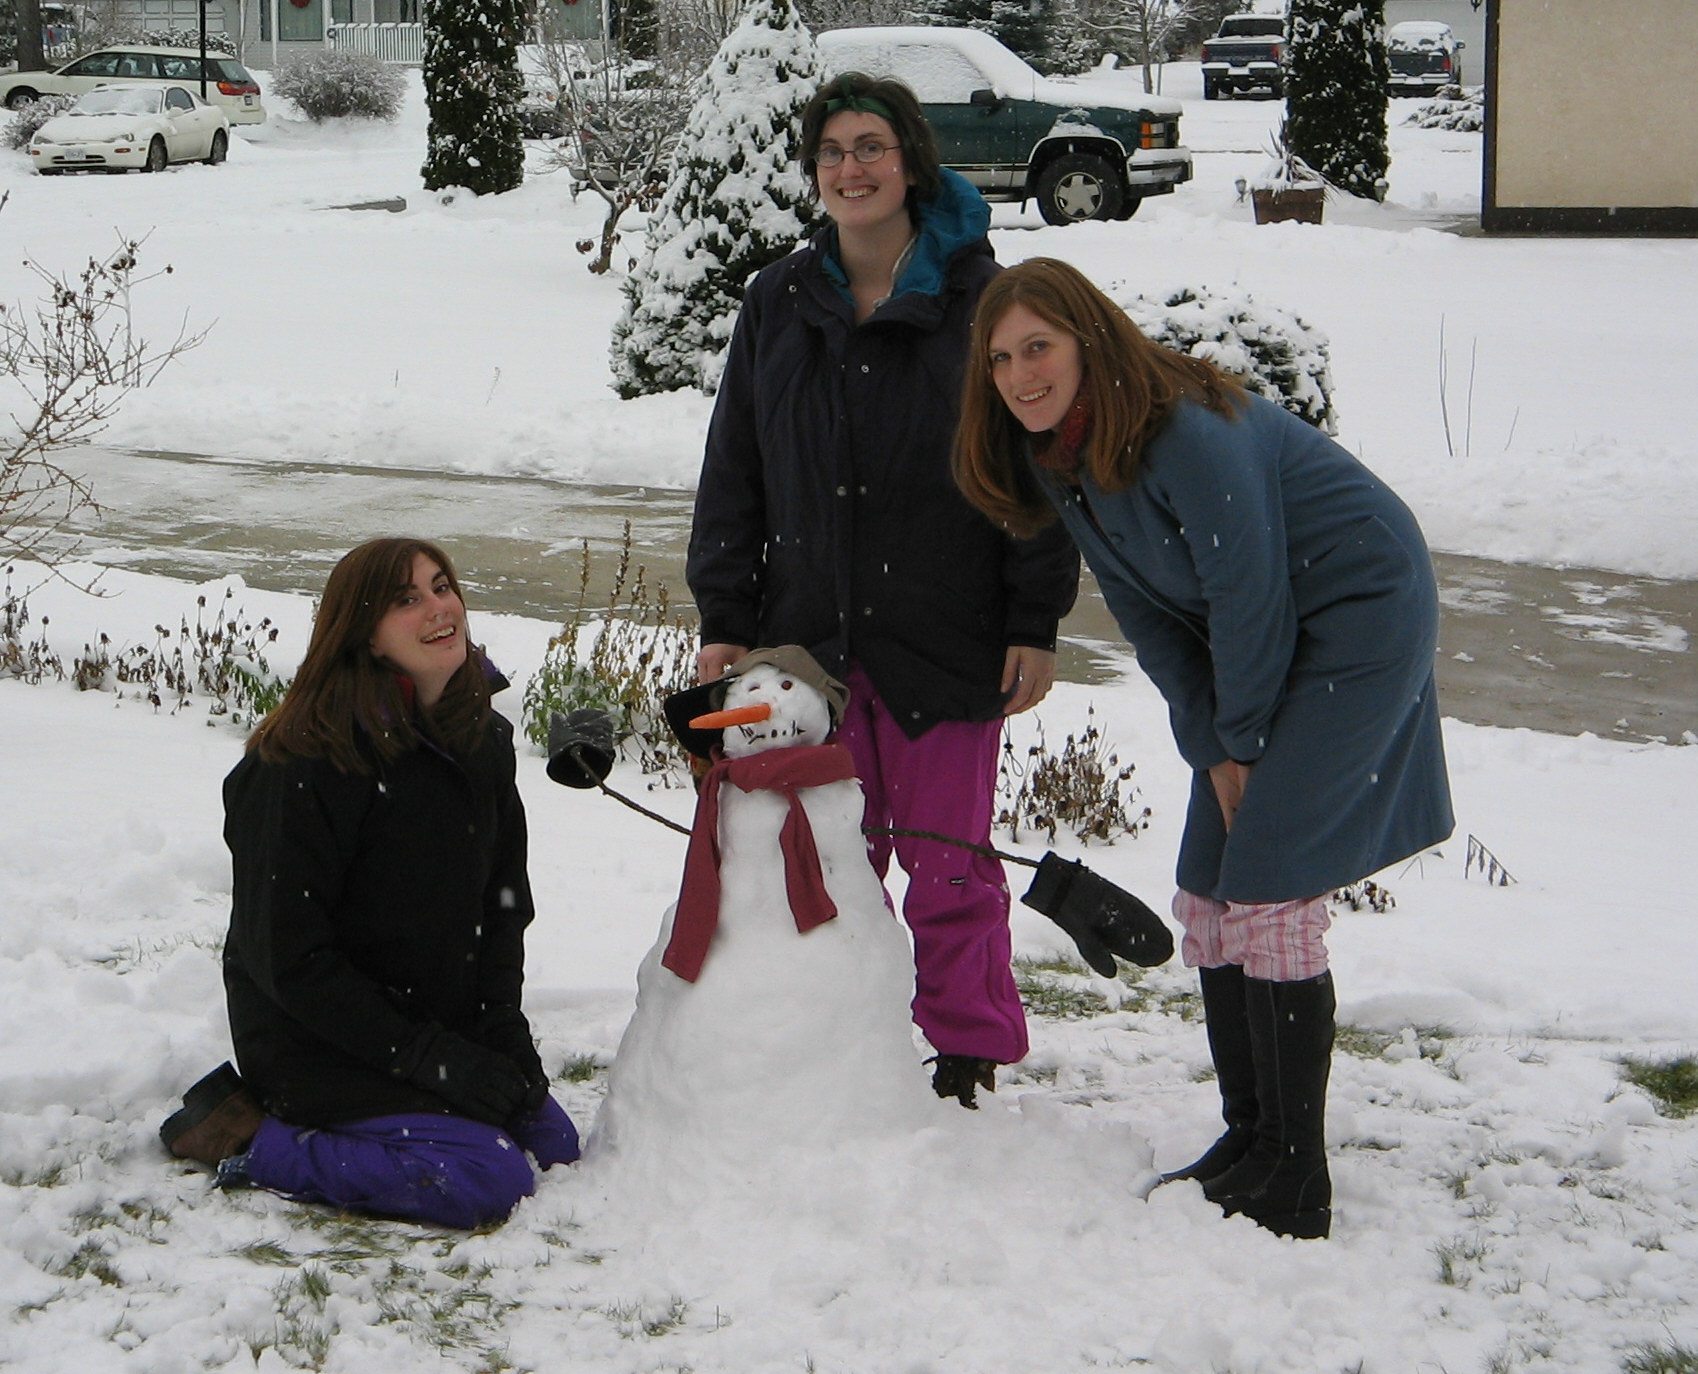 look at our snowman